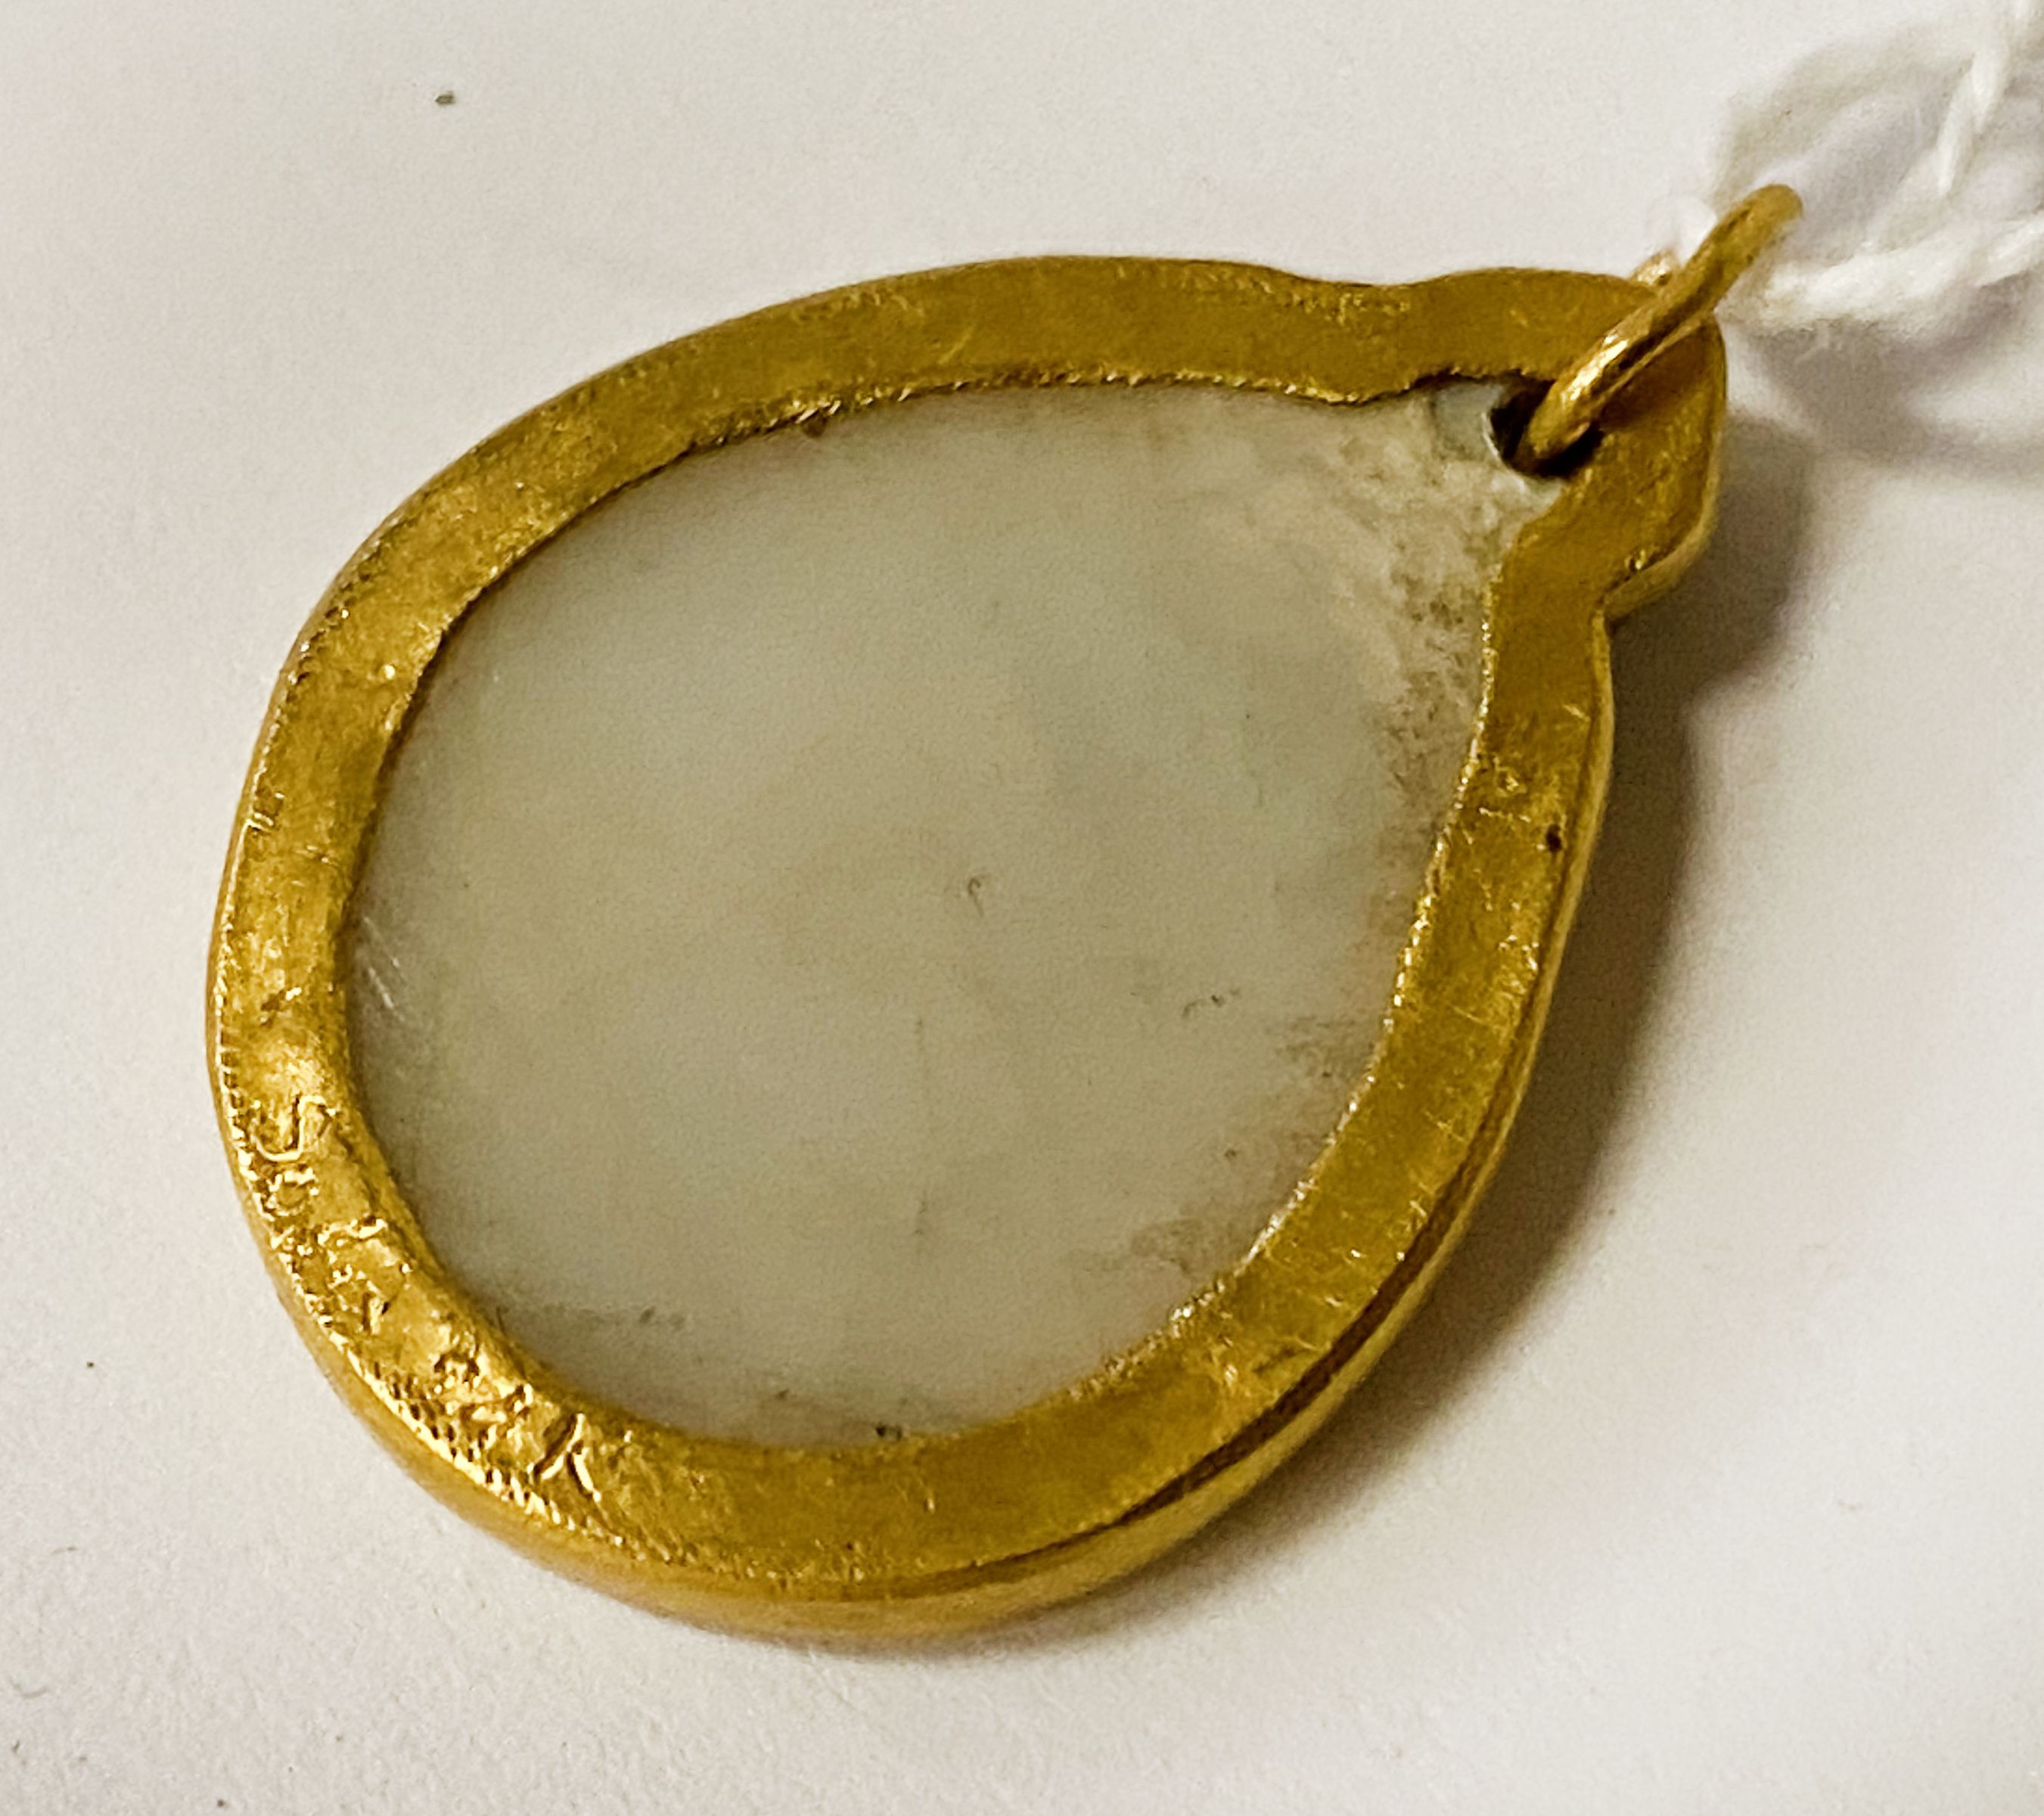 24CT GOLD, MOTHER OF PEARL ANTIQUE PENDANT - Image 2 of 2